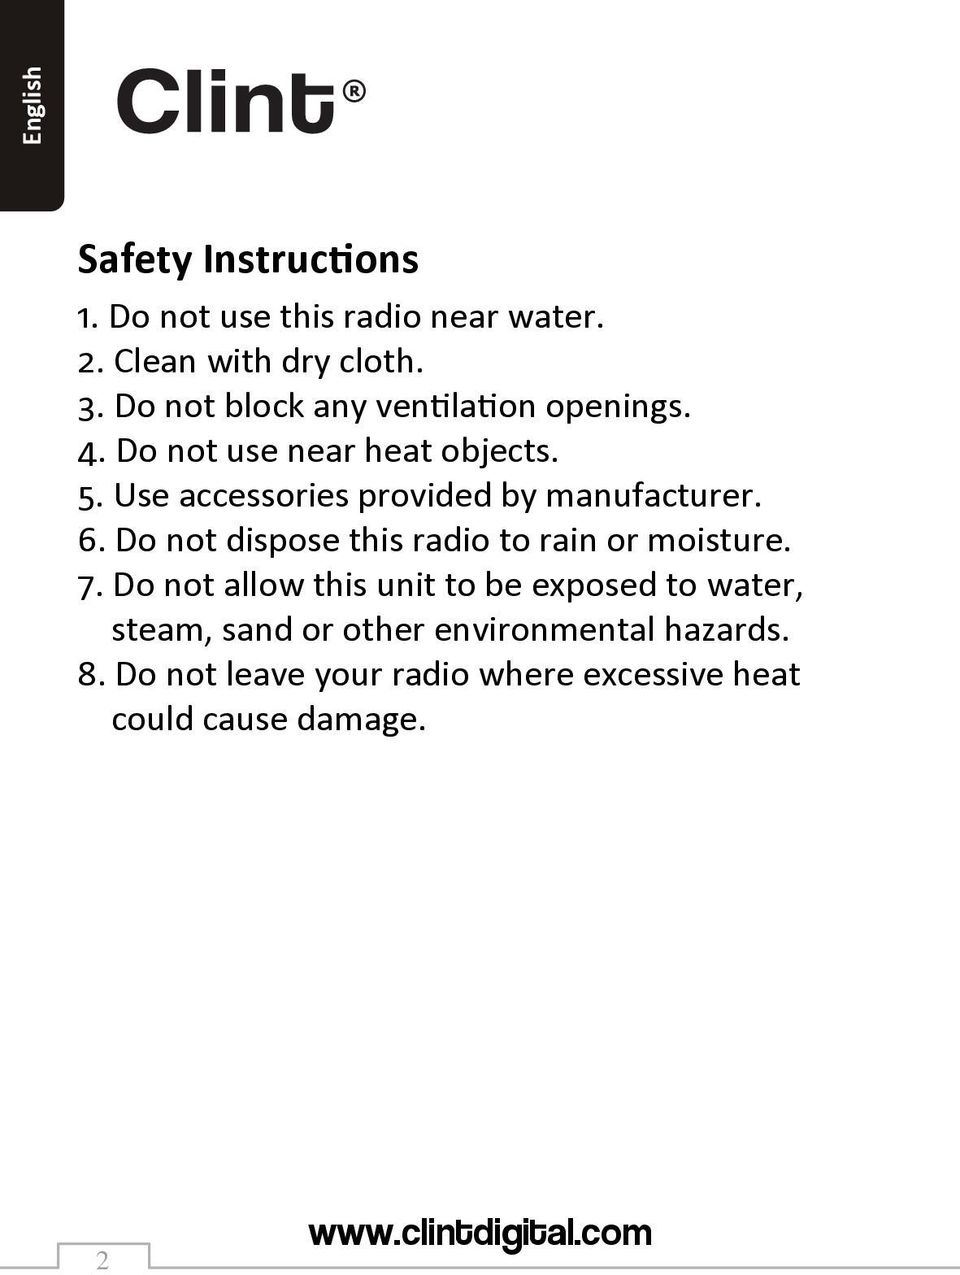 Use accessories provided by manufacturer. 6. Do not dispose this radio to rain or moisture. 7.